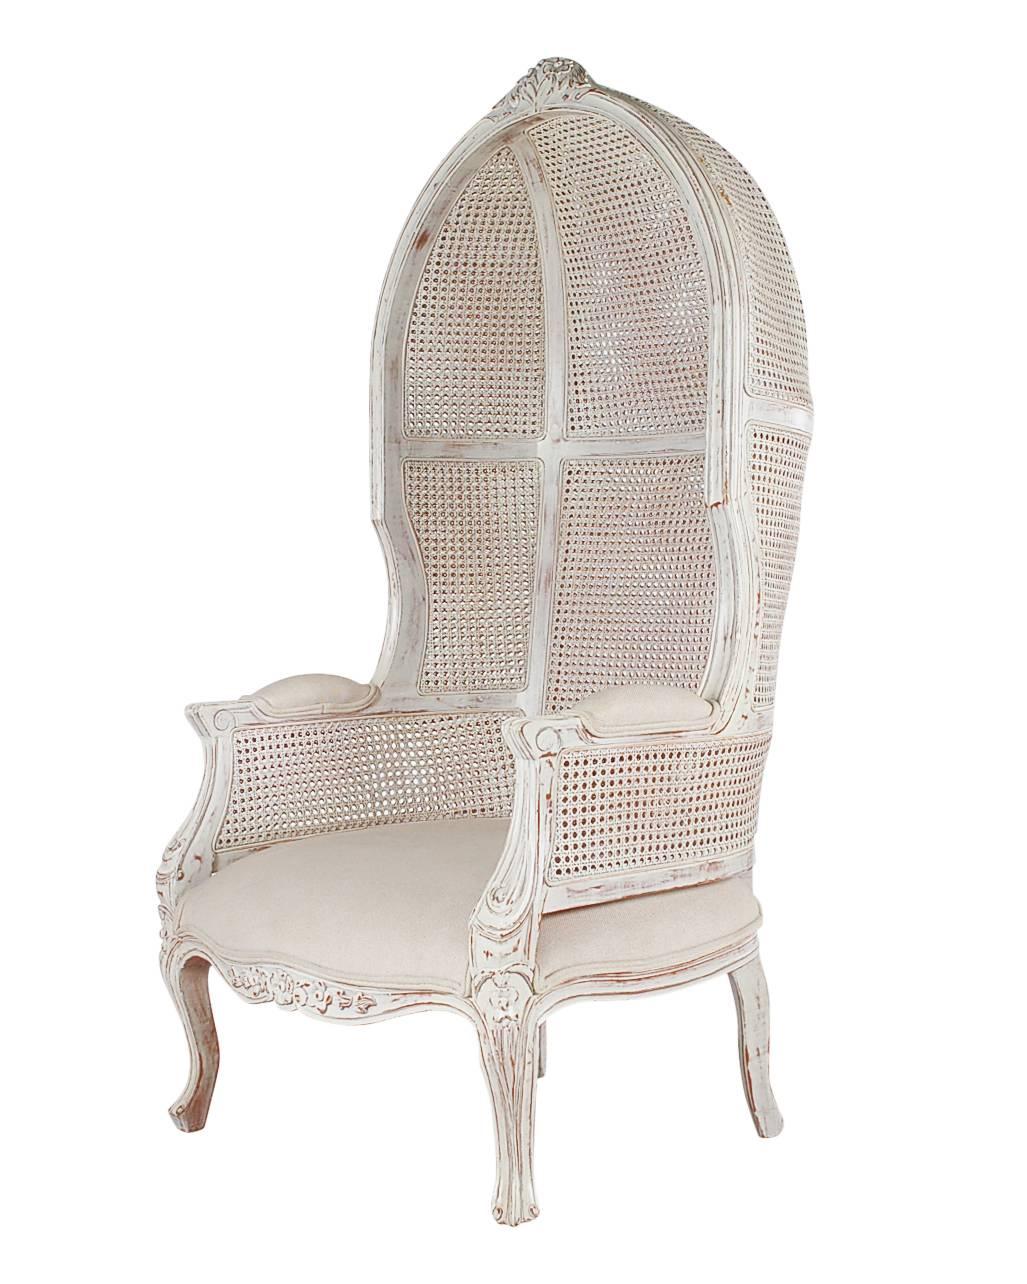 A very well made hood chair in solid mahogany. It features a distressed finish, two layers of caning, and upholstered seat and arms. 